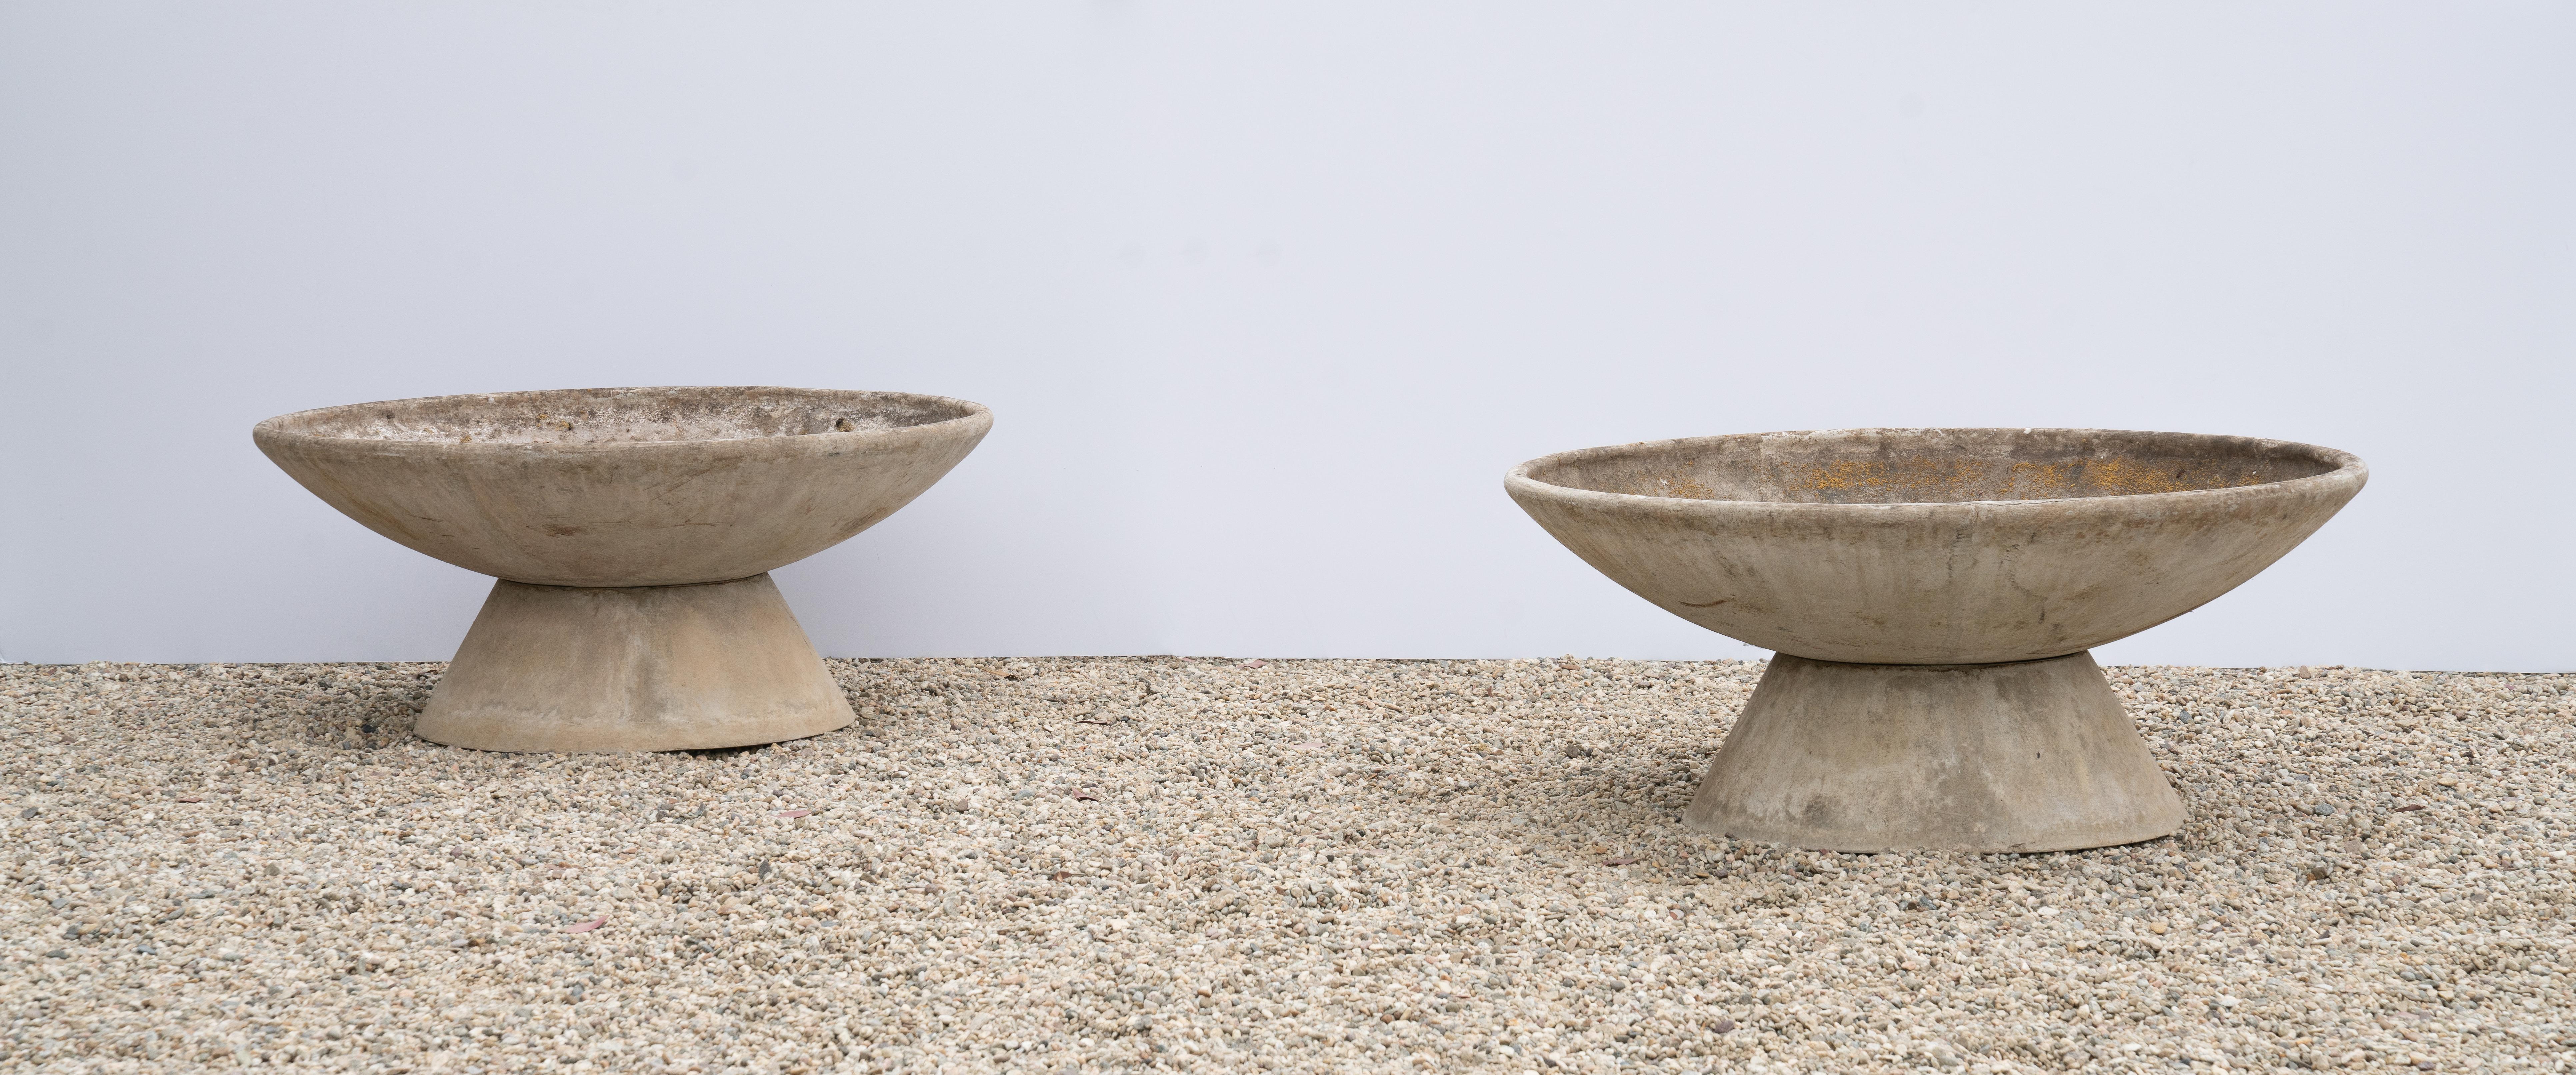 Matching pair of large concrete bowl planters by Swiss architect Willy Guhl for Eternit on stand.
Wonderful patina and character.
Pair available - Priced individually.